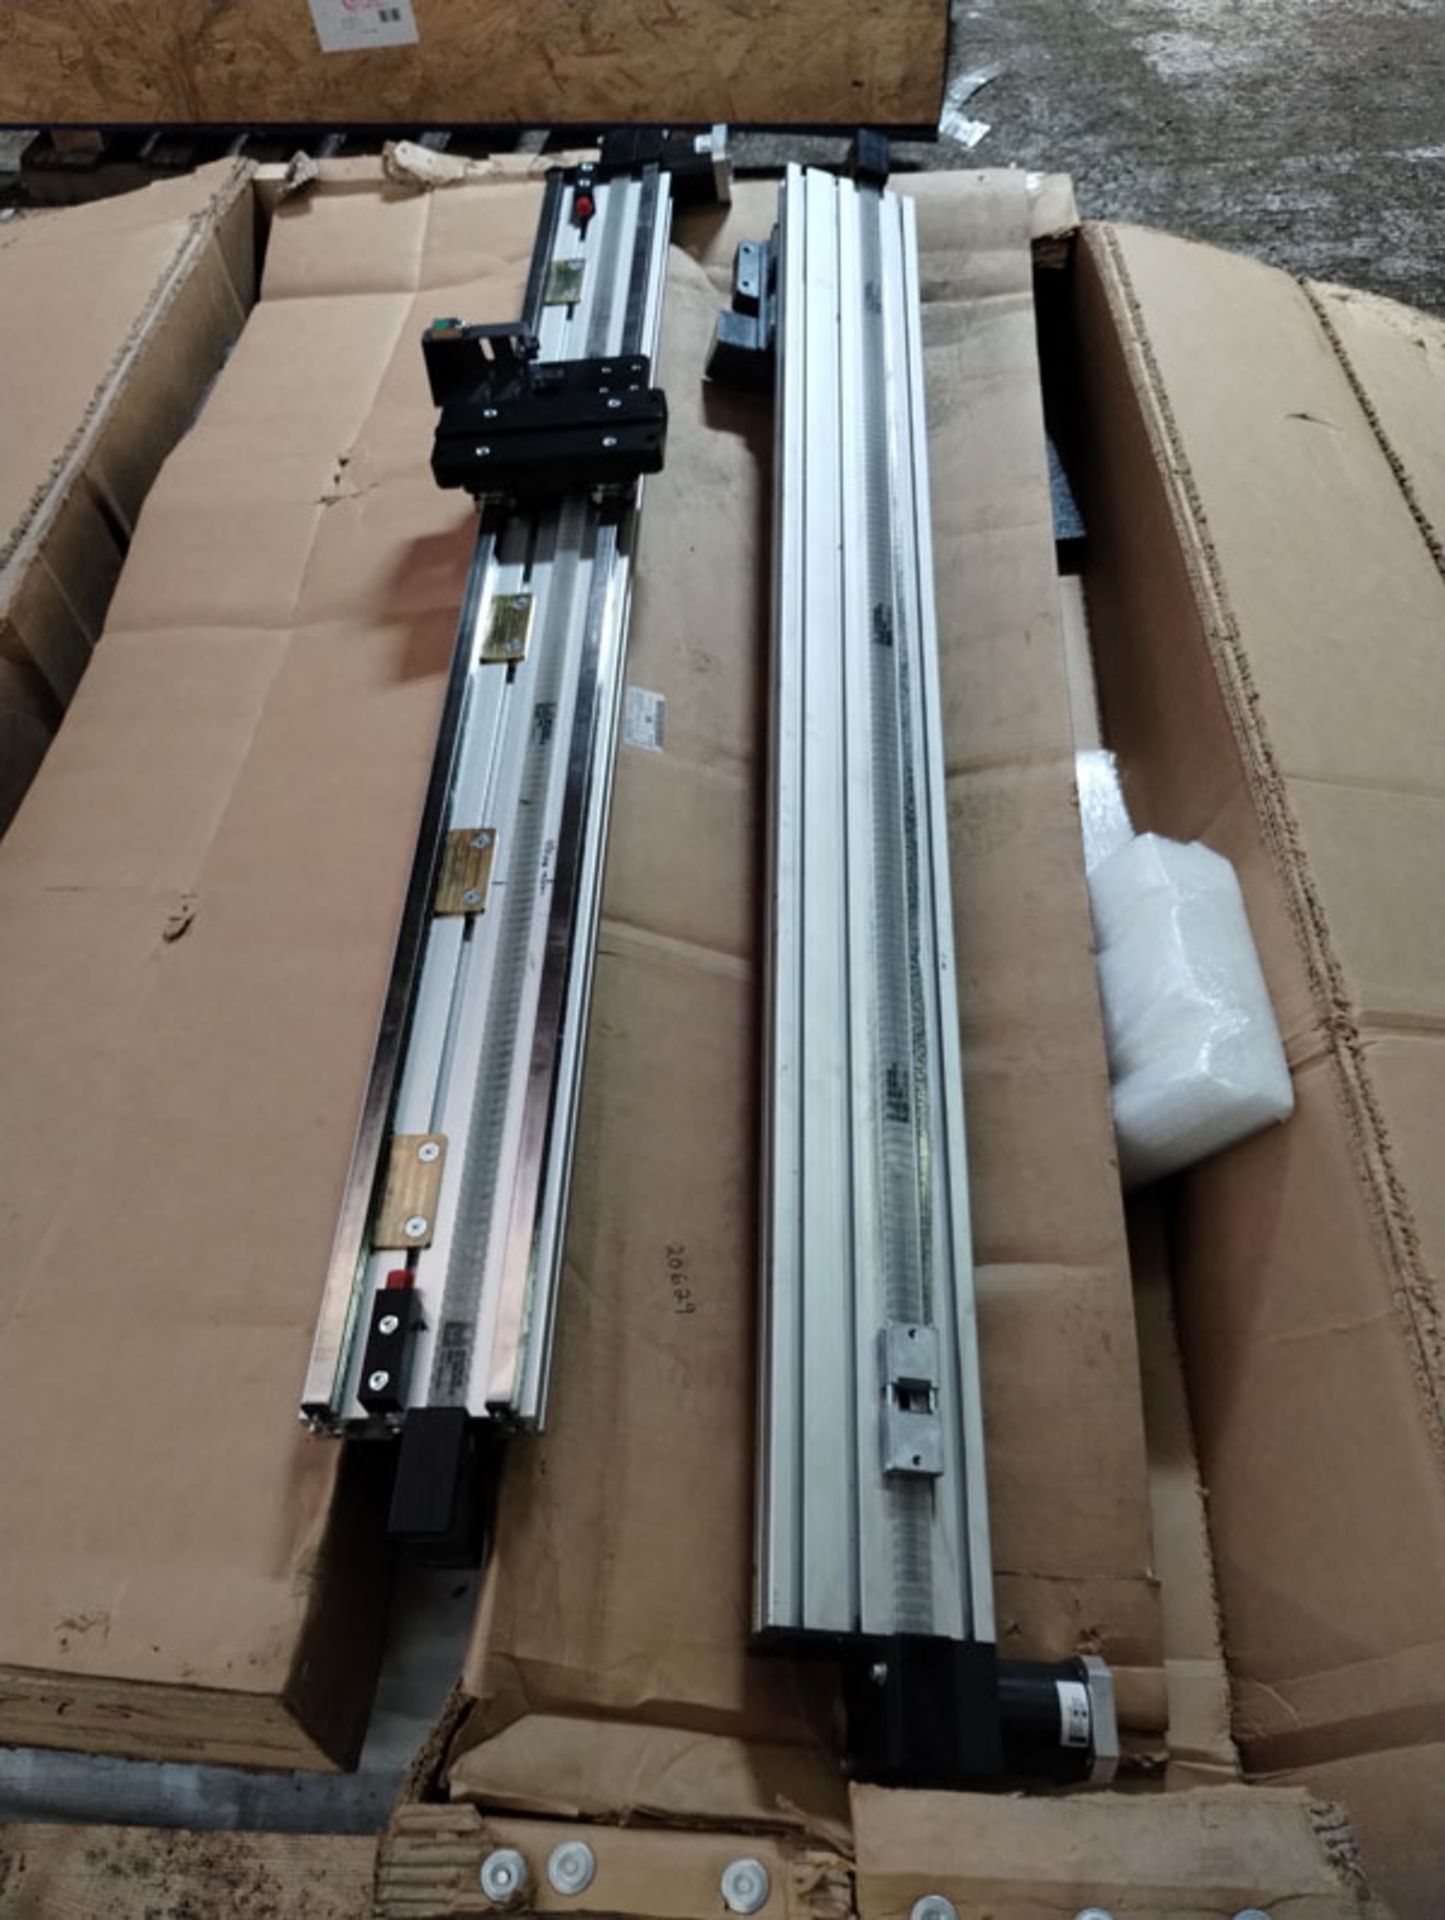 2 LINEAR ACTUATORS - PART# 10067A01 (APPEARS TO BE USED) Lot located at second location: 6800 Union